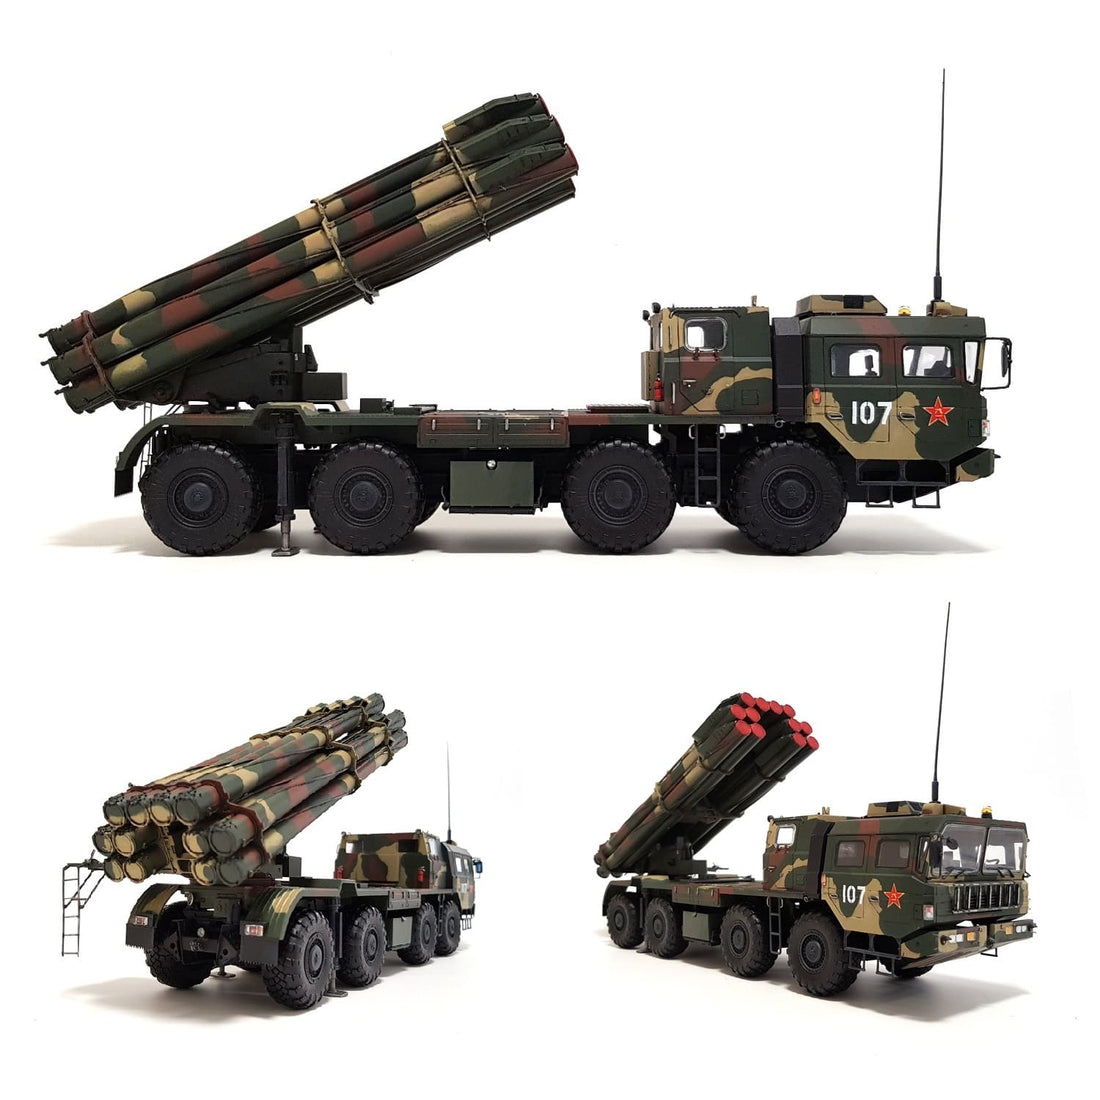 1:35 PHL-03 Multiple Launch Rocket System from TRUMPETER